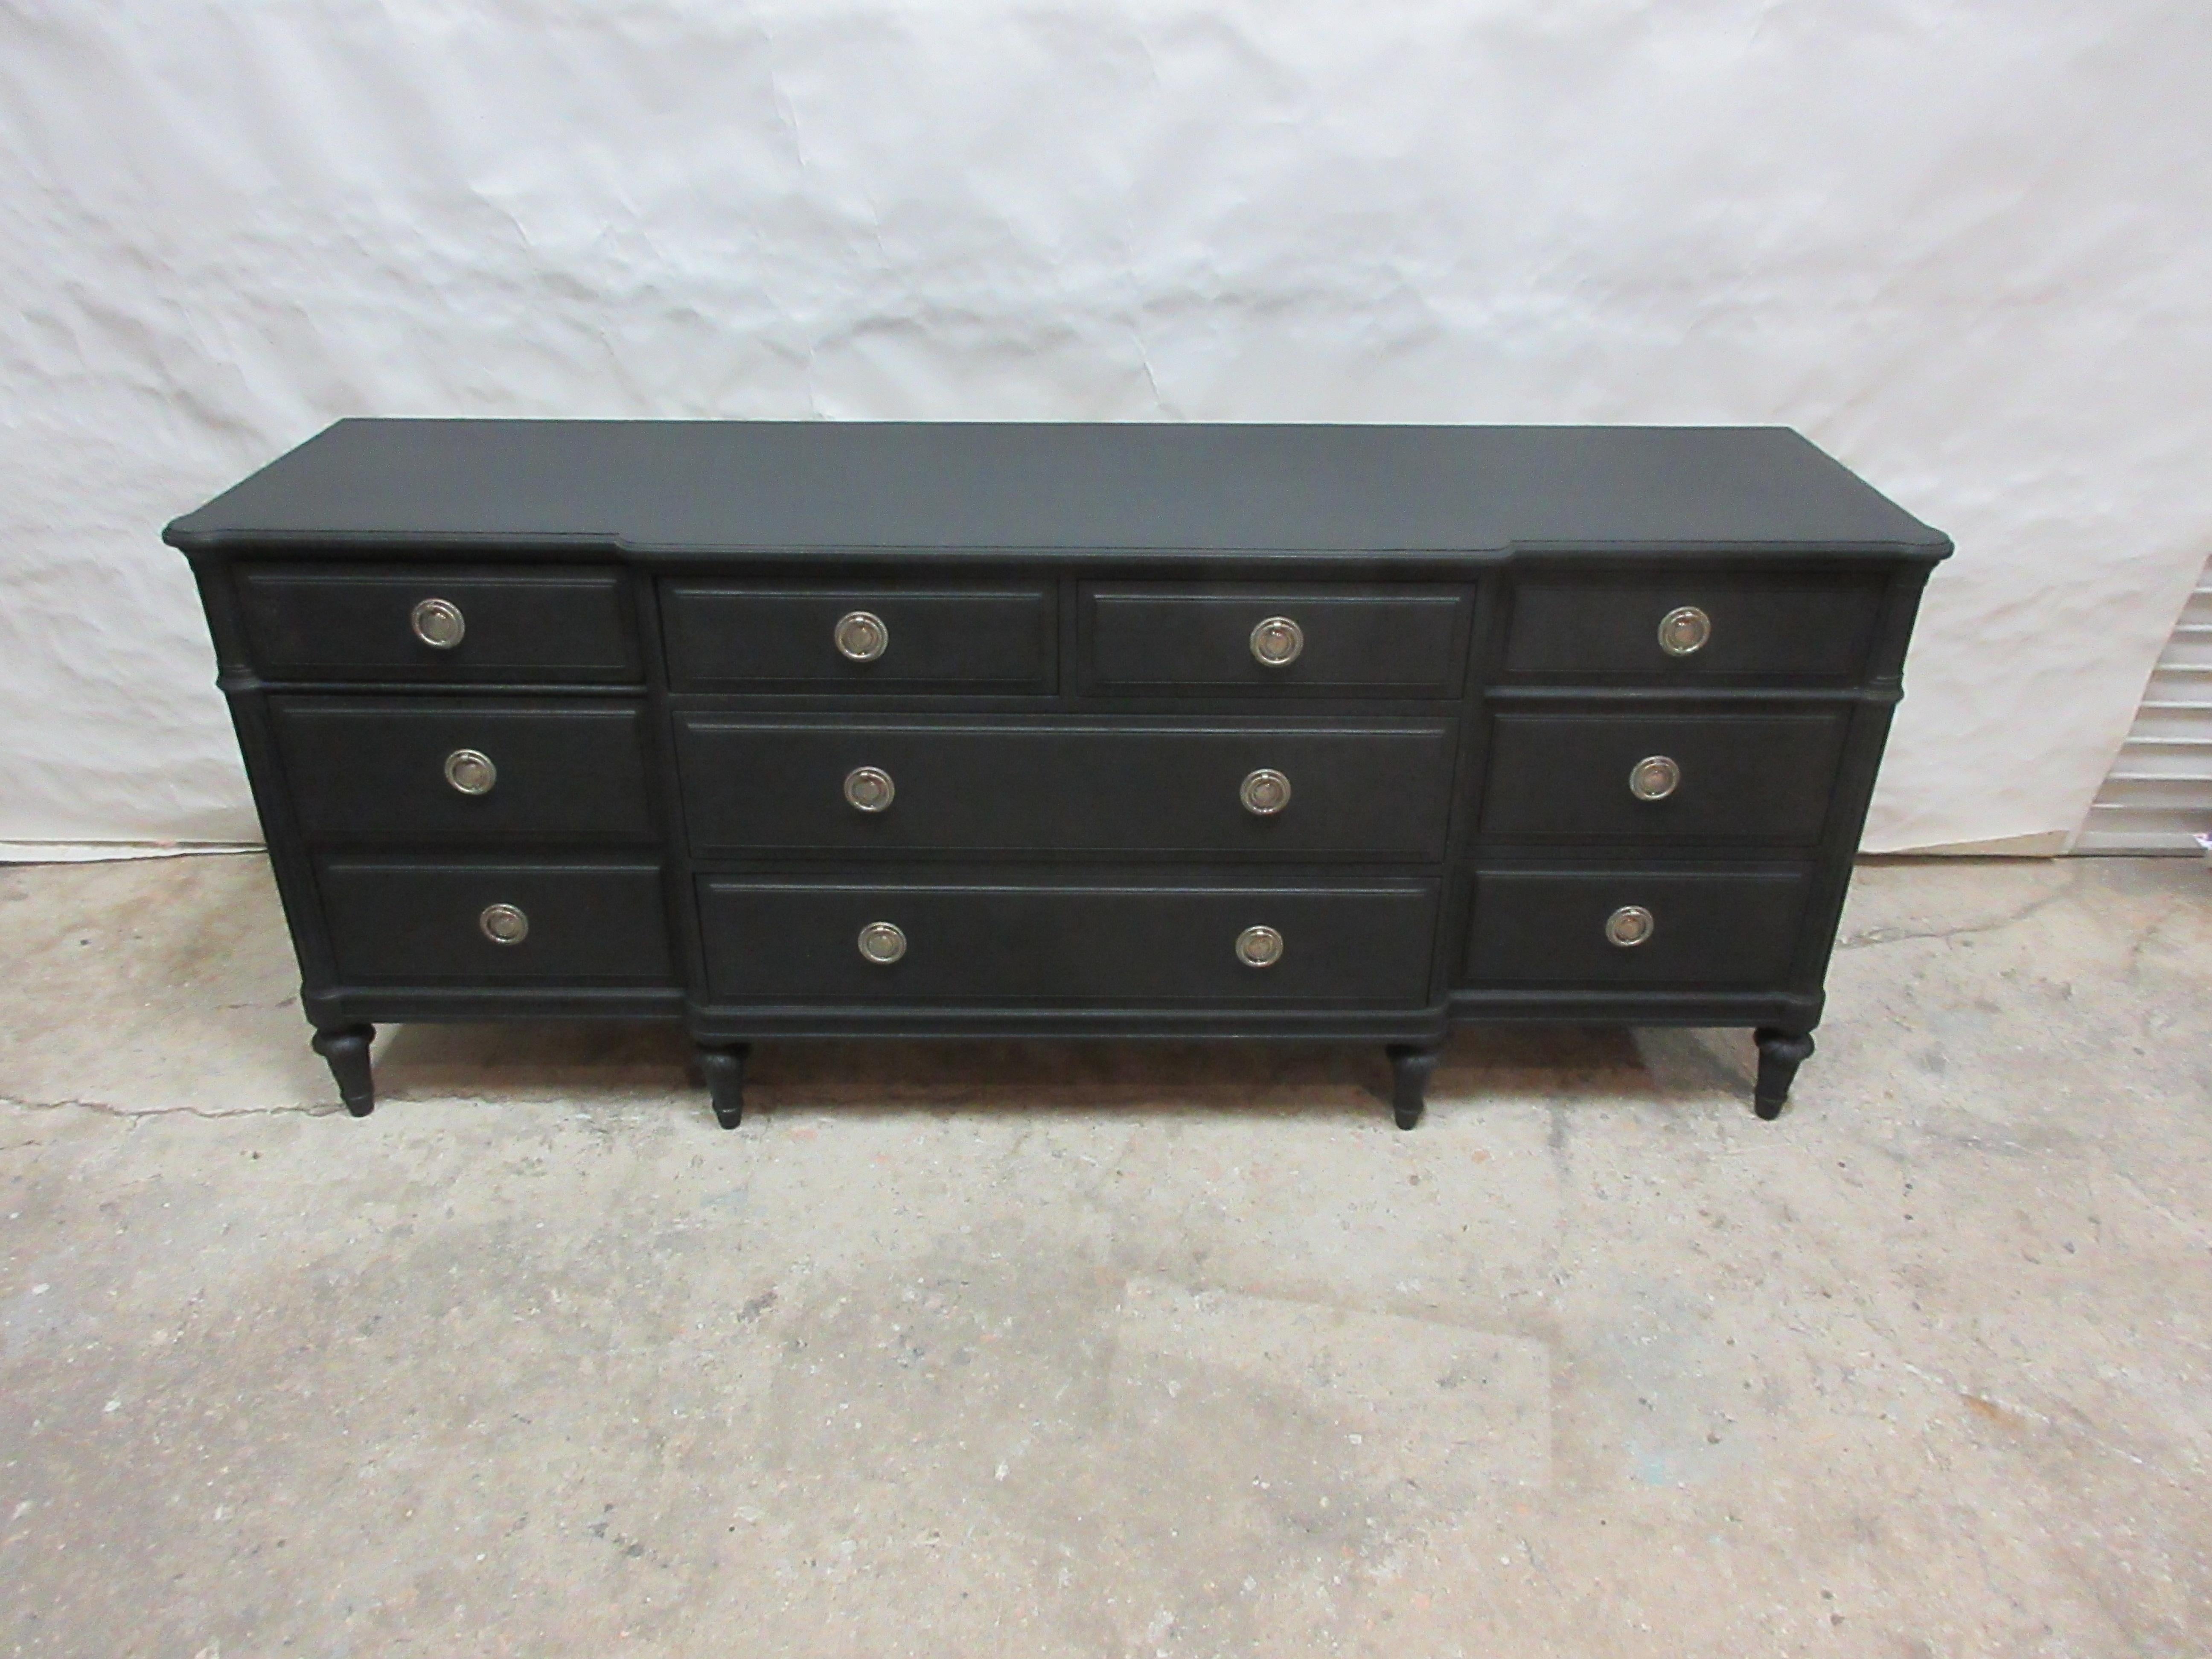 This is a Gustavian Style 10 Drawer Dresser, its been restored and repainted with Milk Paints Midnight Black.